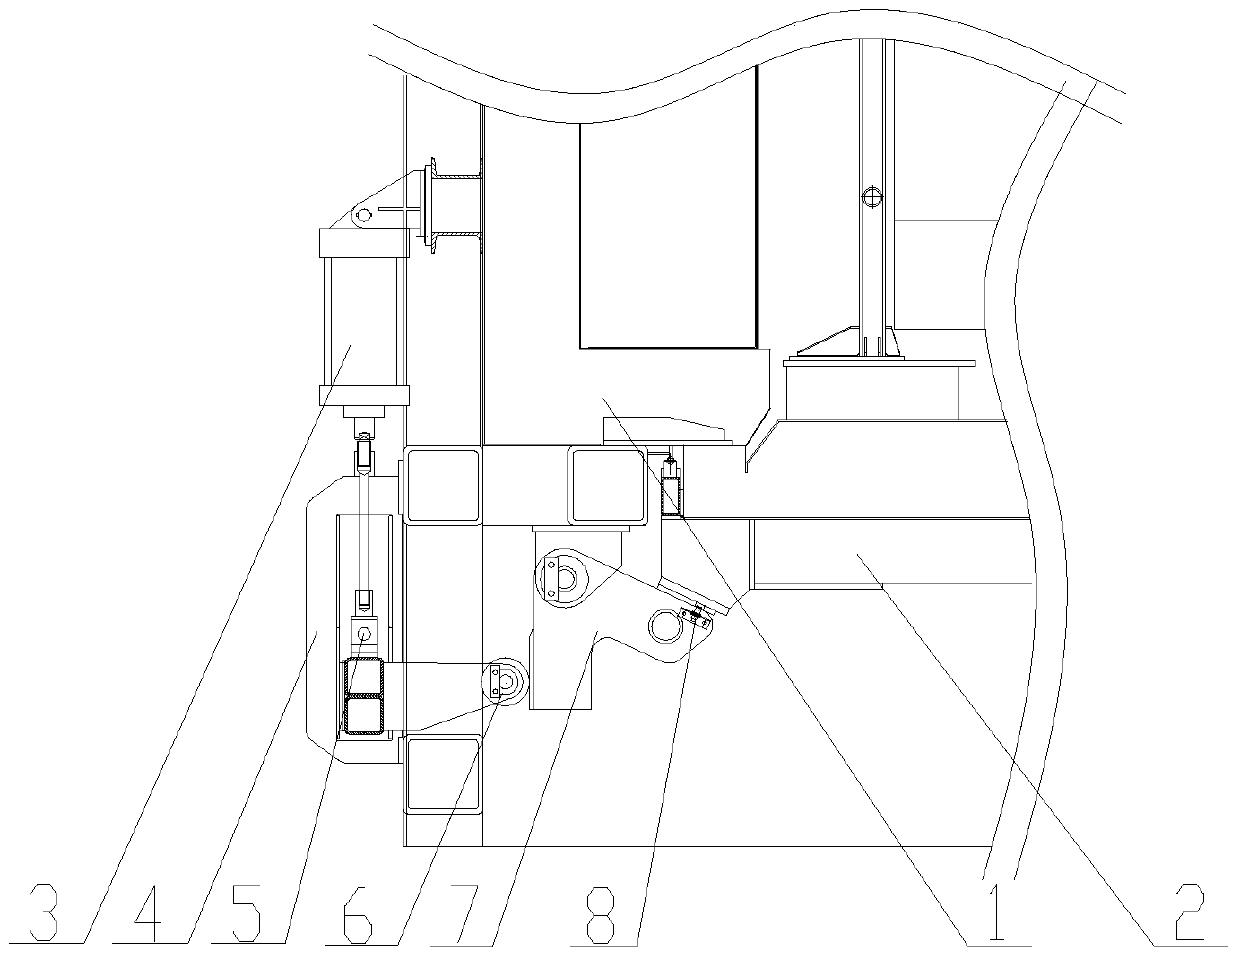 Lifting and pressing structure of the bottom-mounted furnace door